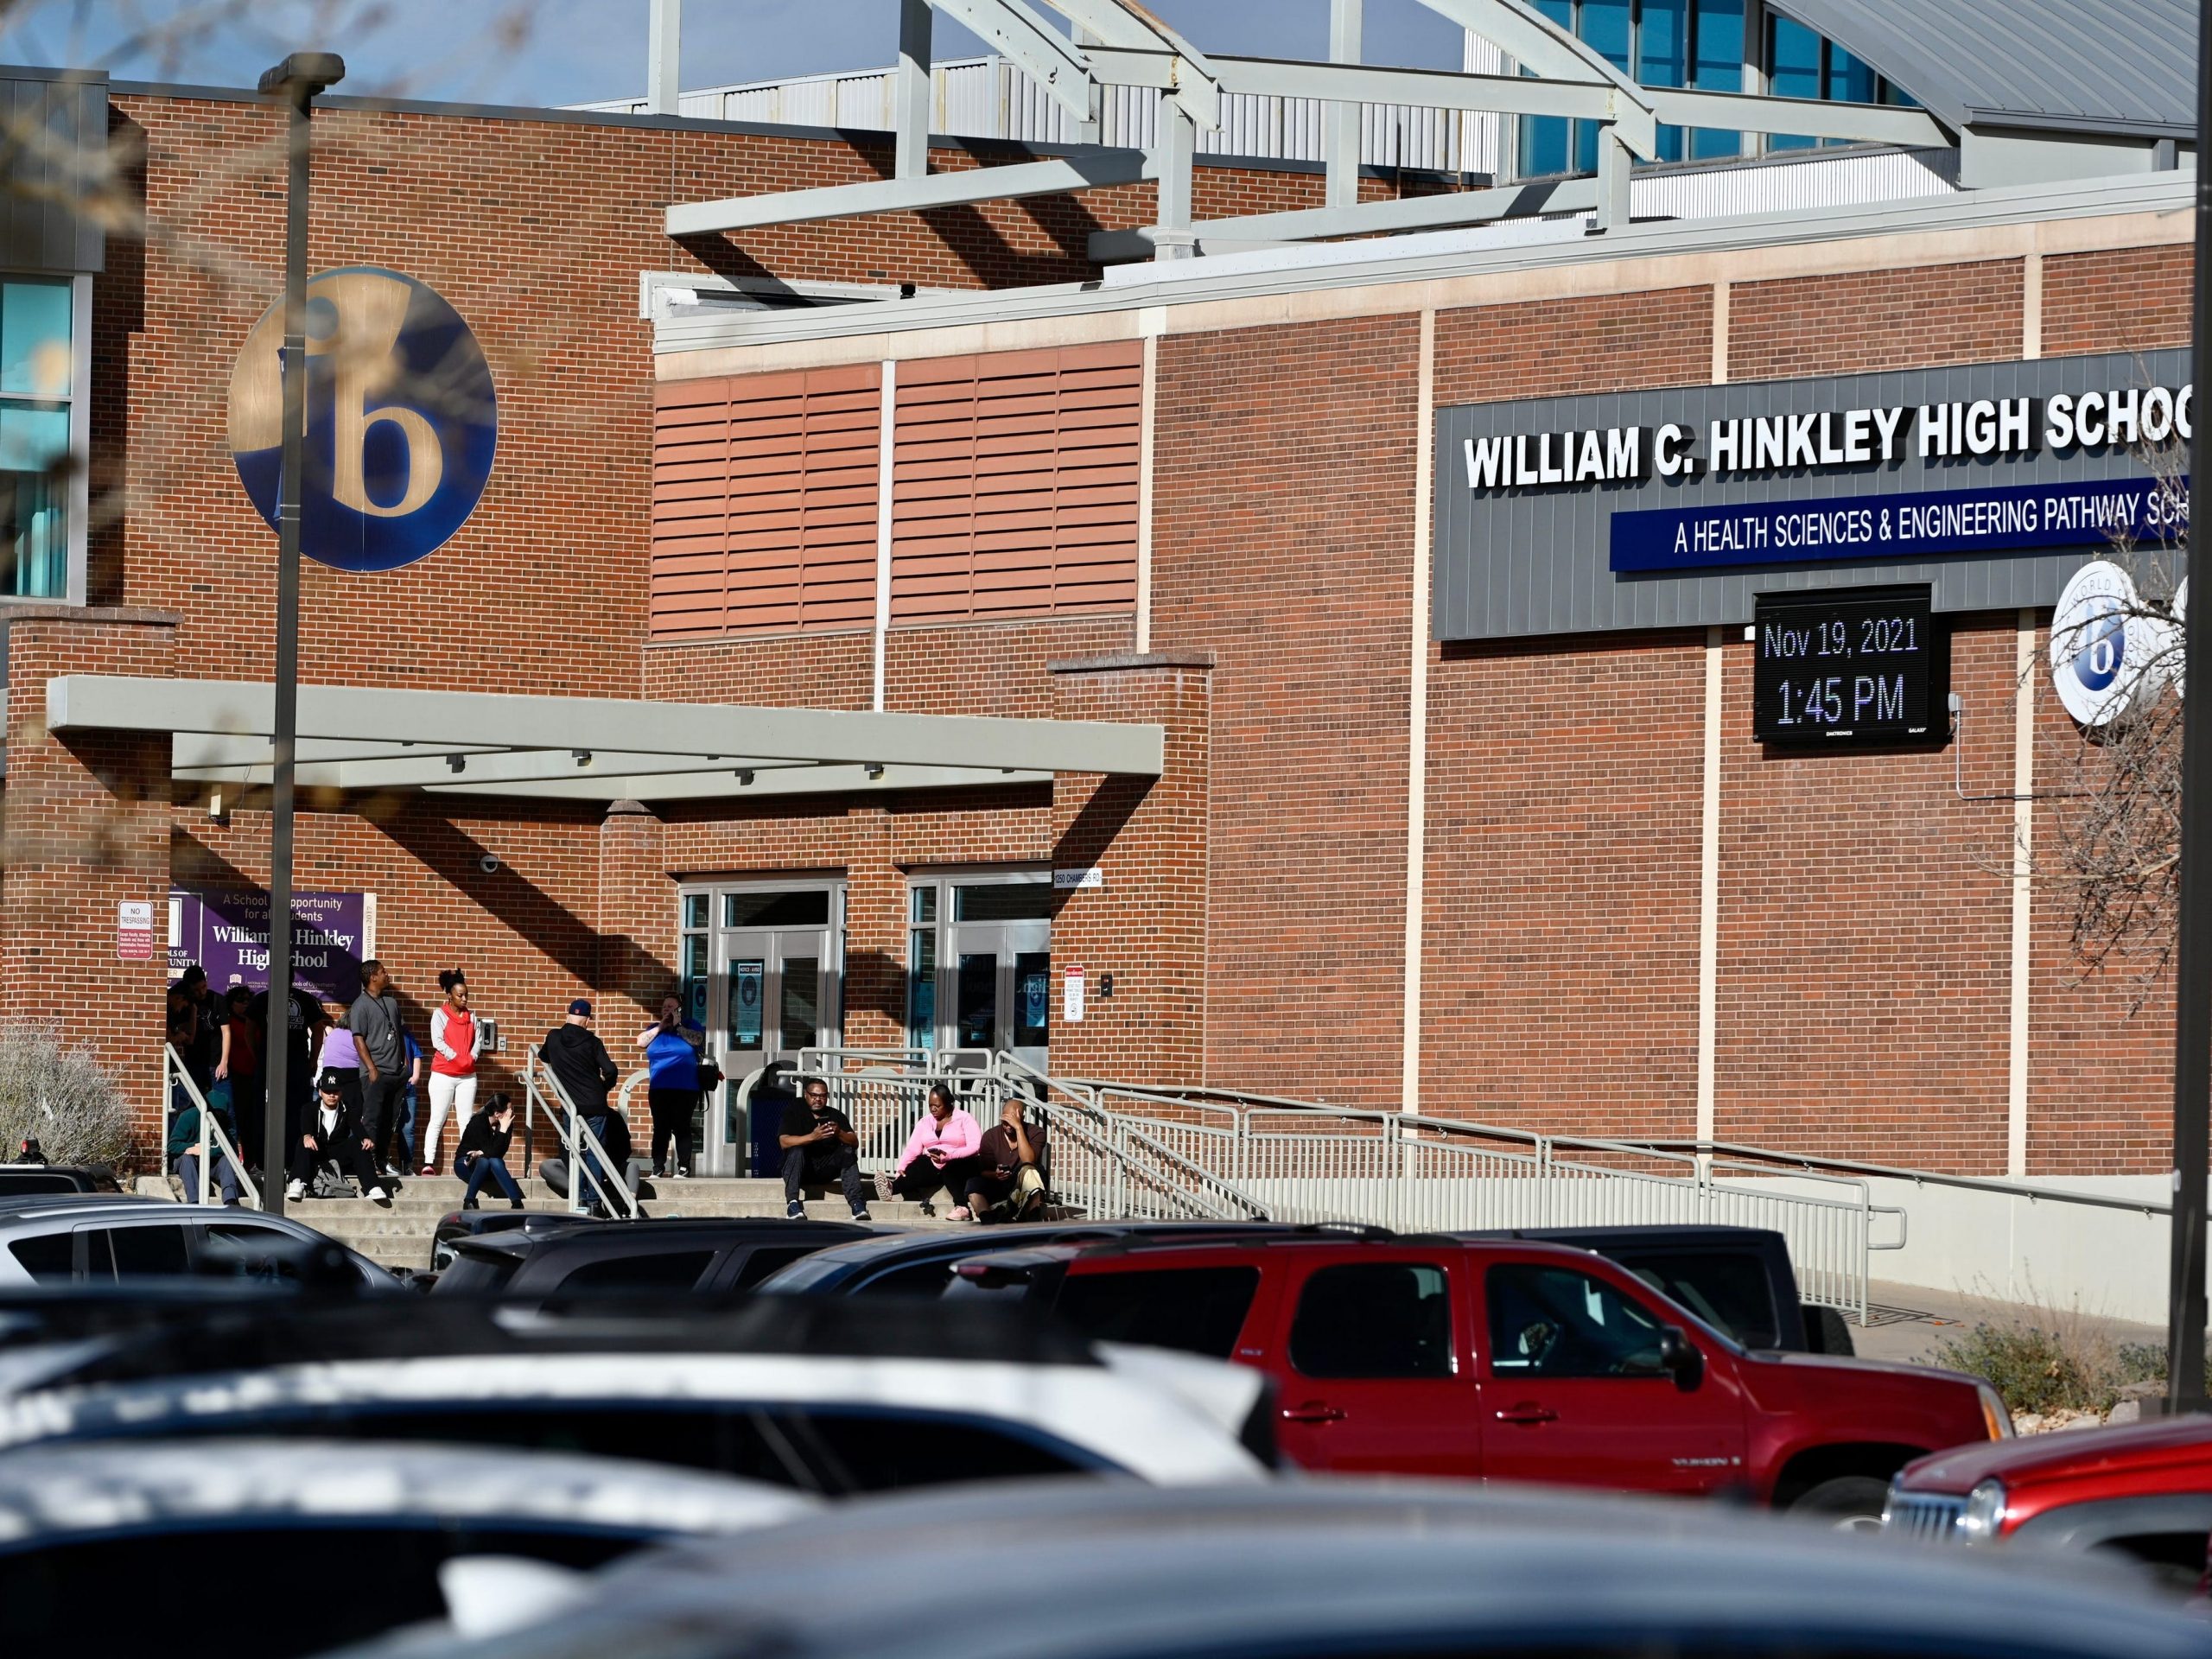 Students and staff gather outside an entrance to the school after a shooting in the parking lot of Hinkley High School in Aurora, Colorado on Friday, November 19, 2021.